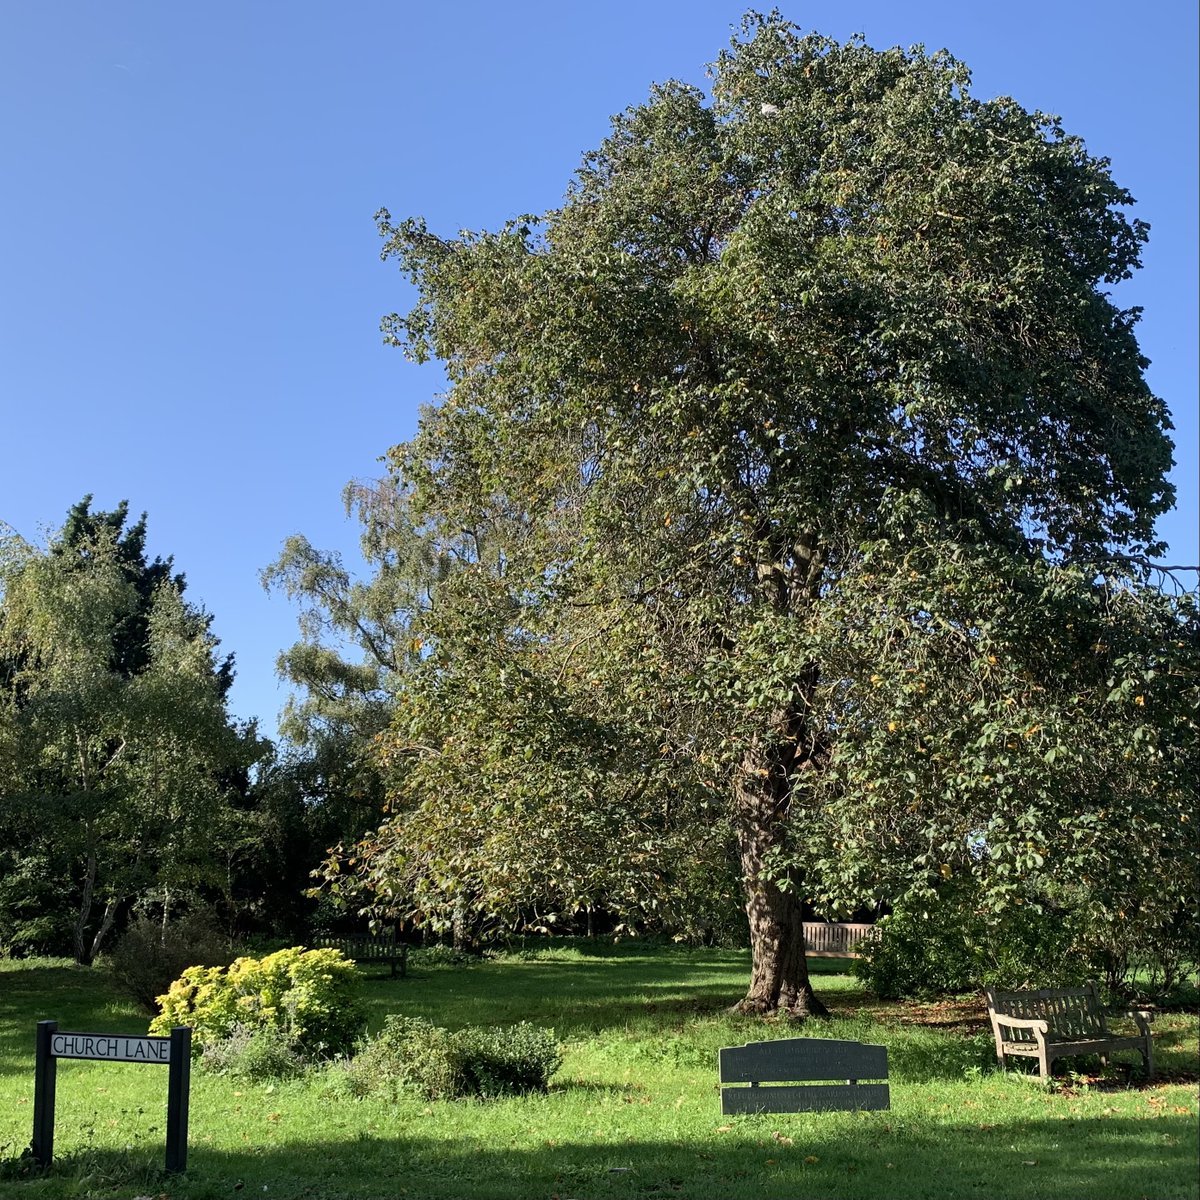 Come along on Saturday 4th May, 2-4 pm to the Alice Hibbert-Ware Memorial Garden. The garden will be formally re-opened by Dr Juliet Vickery, CEO of the British Trust for Ornithology. There will be tours, ice cream, coffee and more! Timetable to follow soon.